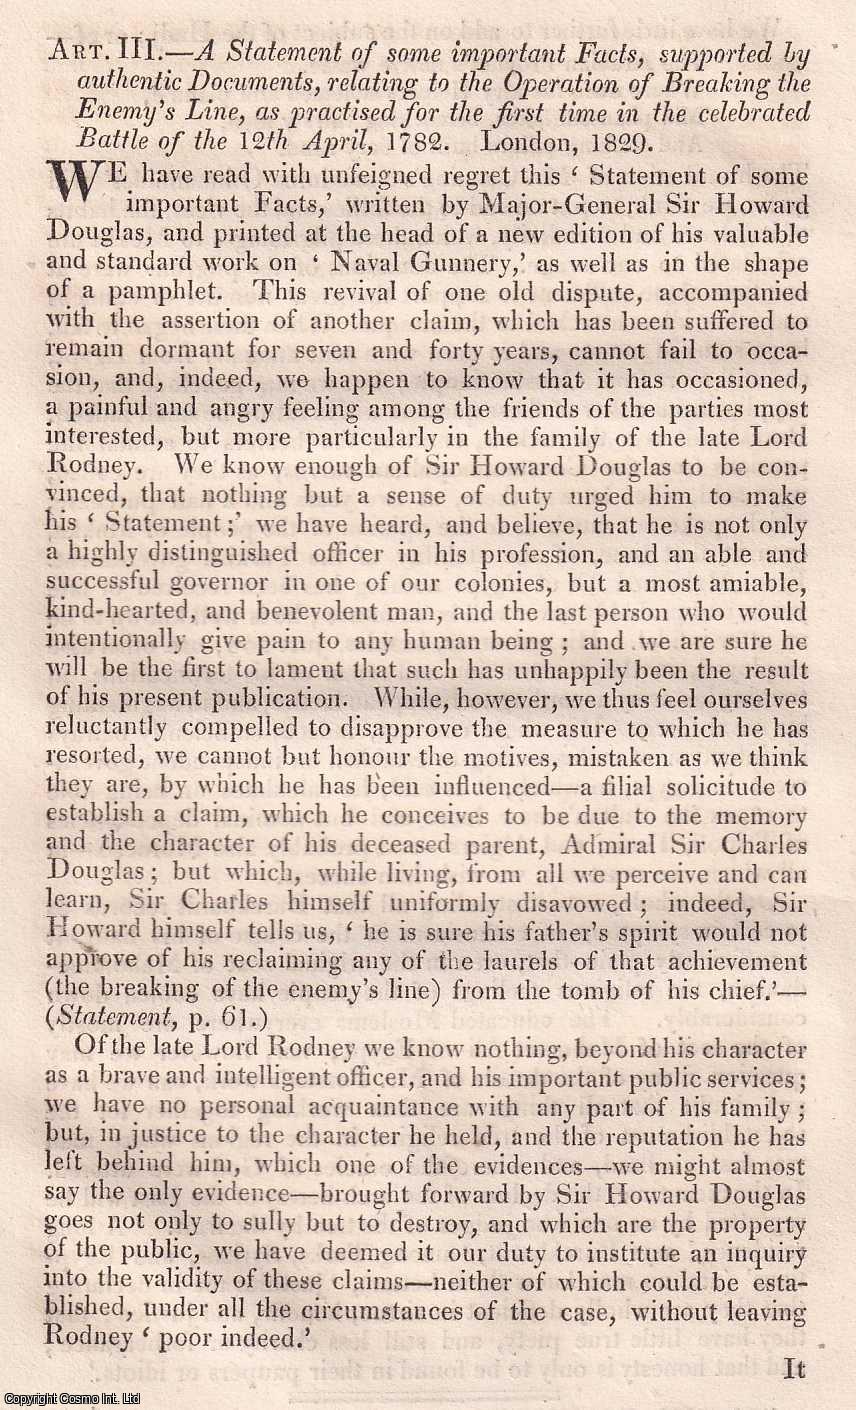 John Barrow - Rodney's Battle of 12th April, 1782. The Operation of Breaking the Enemy's Line. An uncommon original article from The Quarterly Review, 1830.